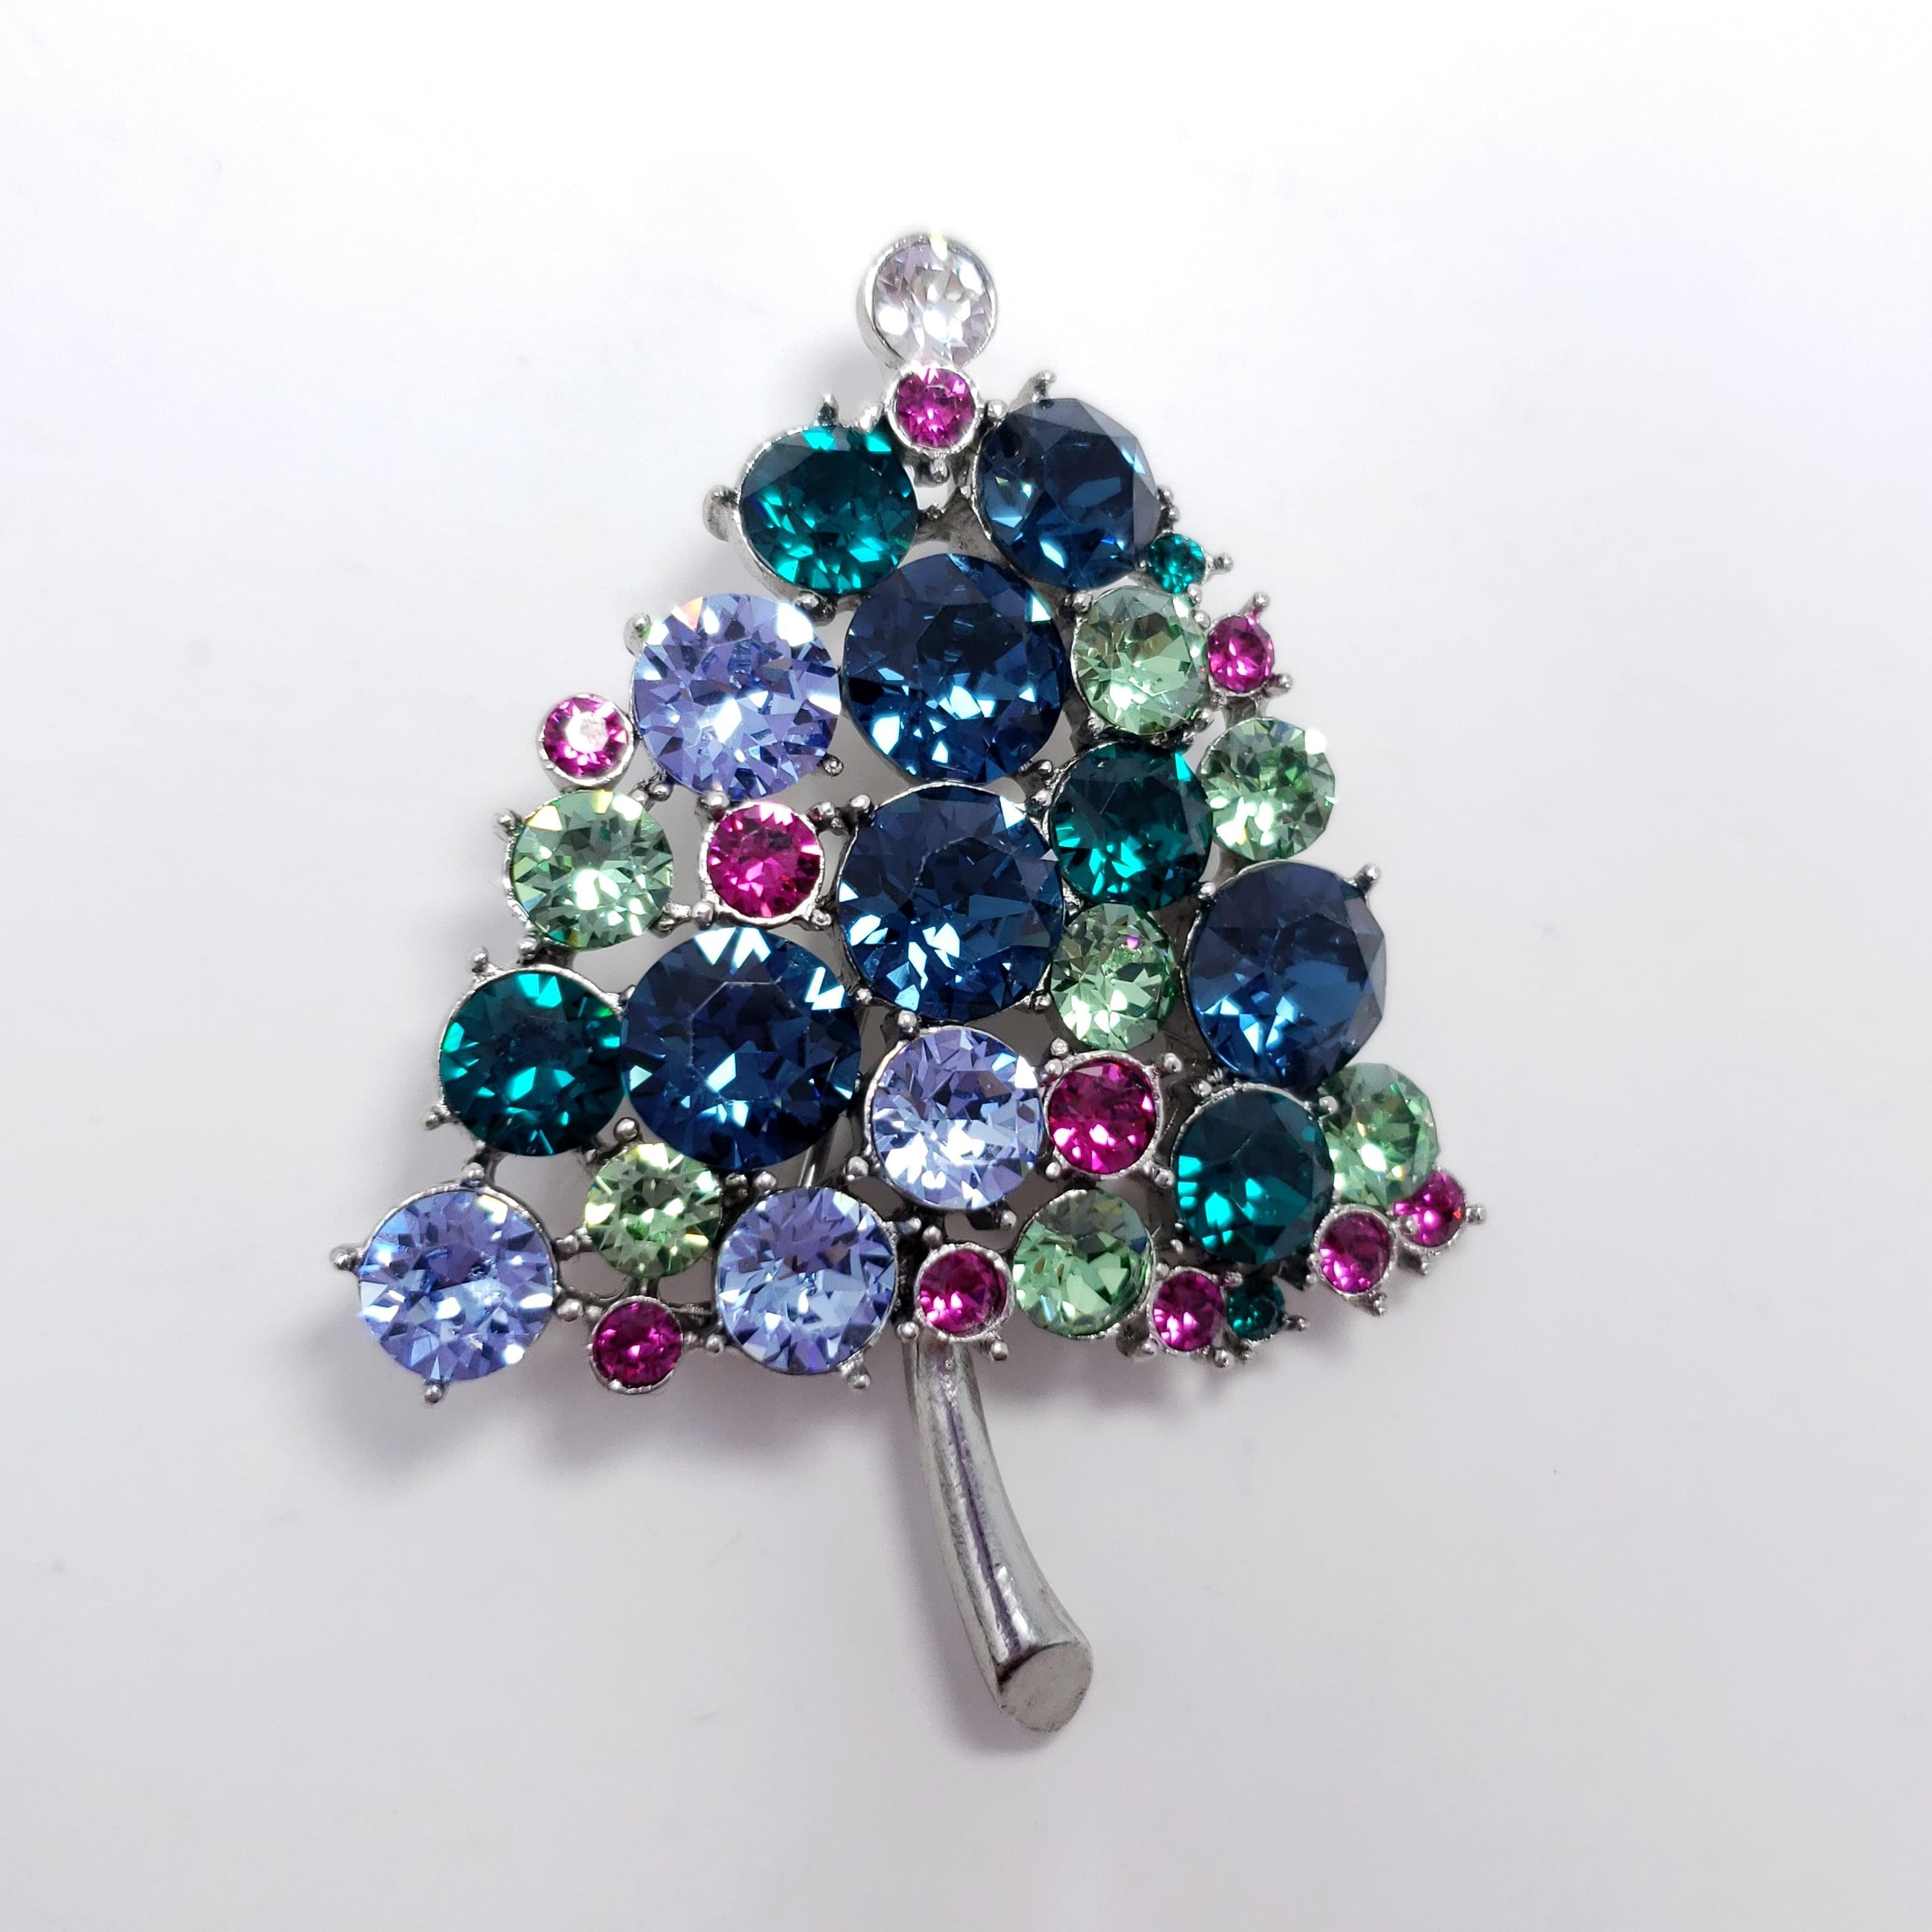 Festive Christmas / New Year pin brooch by Vendome. This dazzling conifer is decorated with sparkling crystals. Silver-tone metal.

Vintage collector's costume jewelry pin, wonderfully preserved and never worn.

Hallmarks, Marks, etc: Vendome